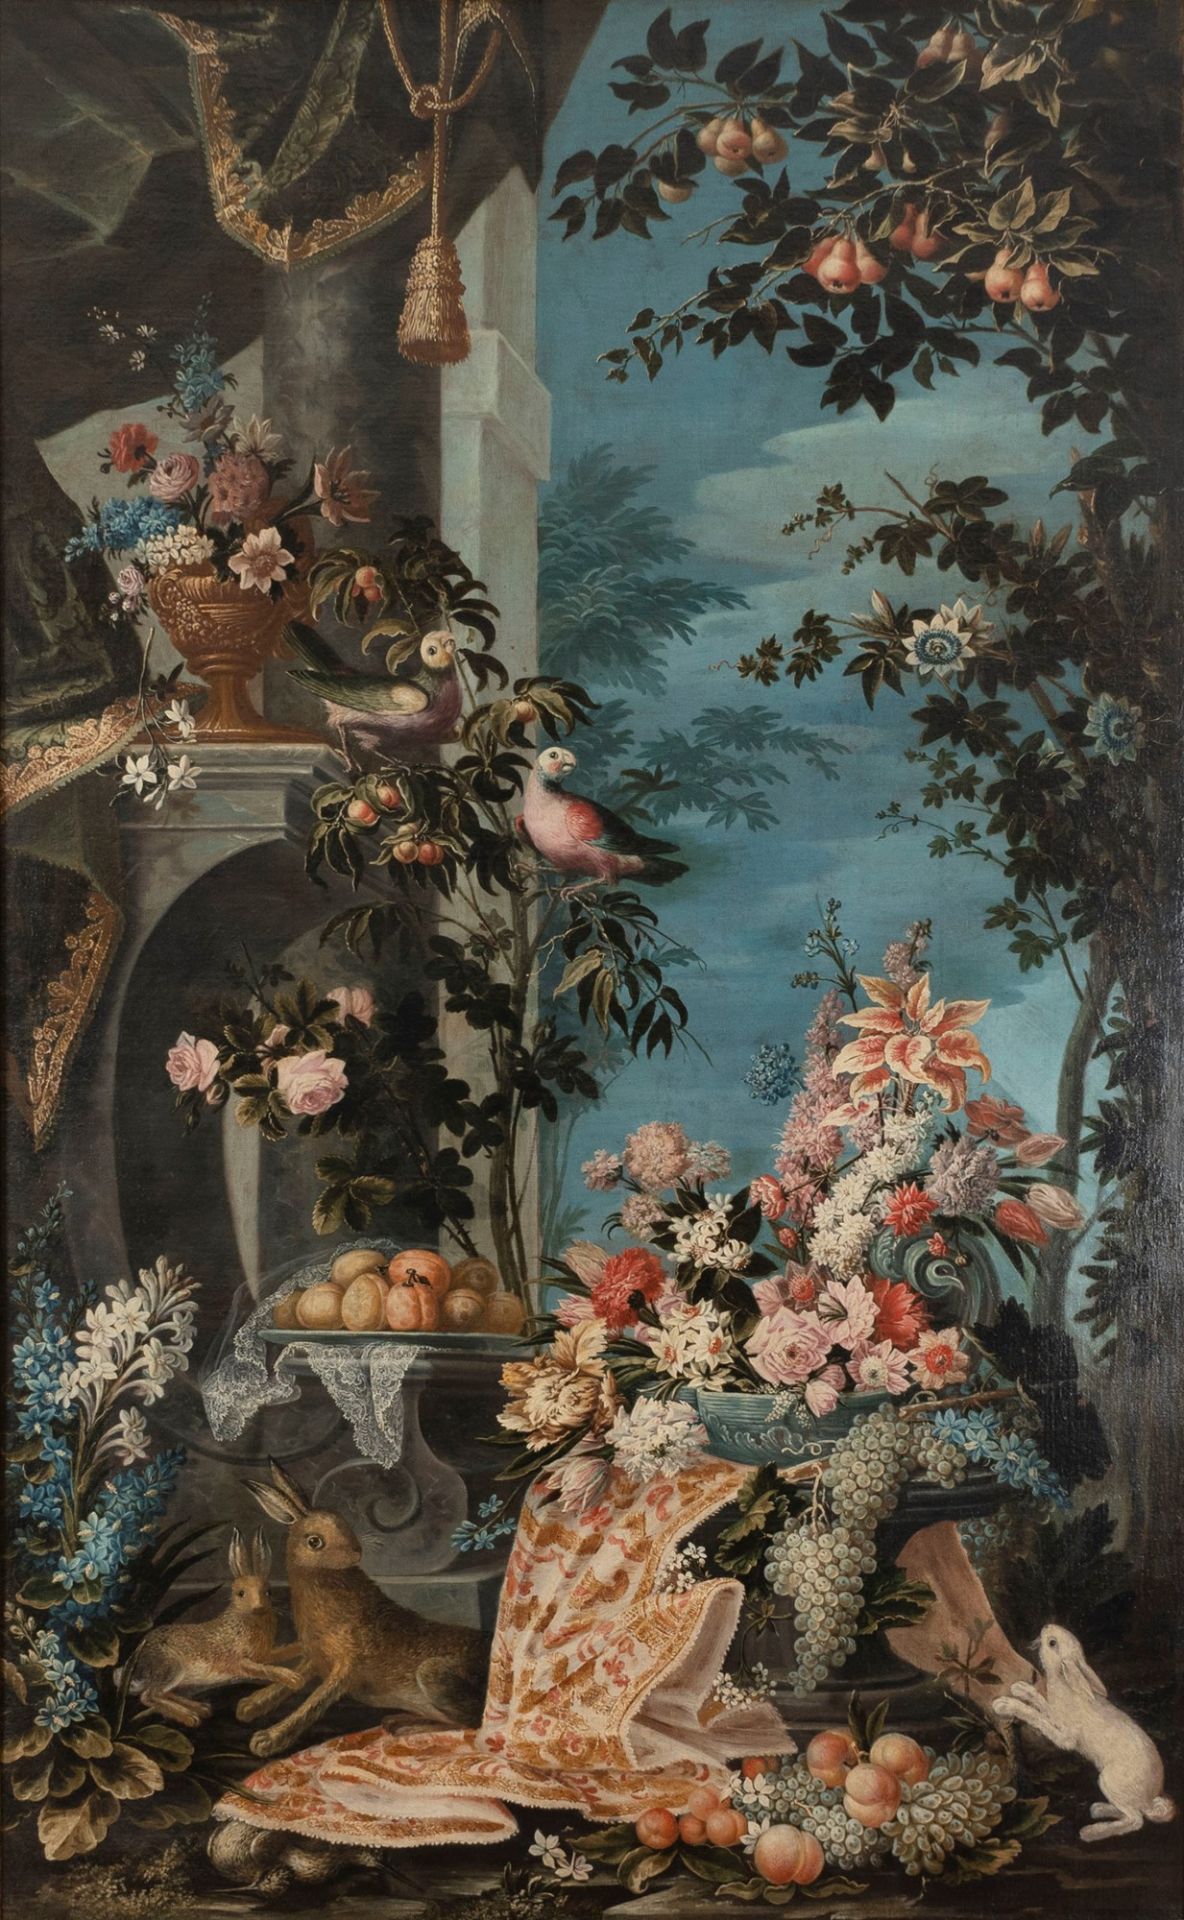 Lombard School, XVIII century - Flowers and fruit in an Italian garden with bunnies and parrots